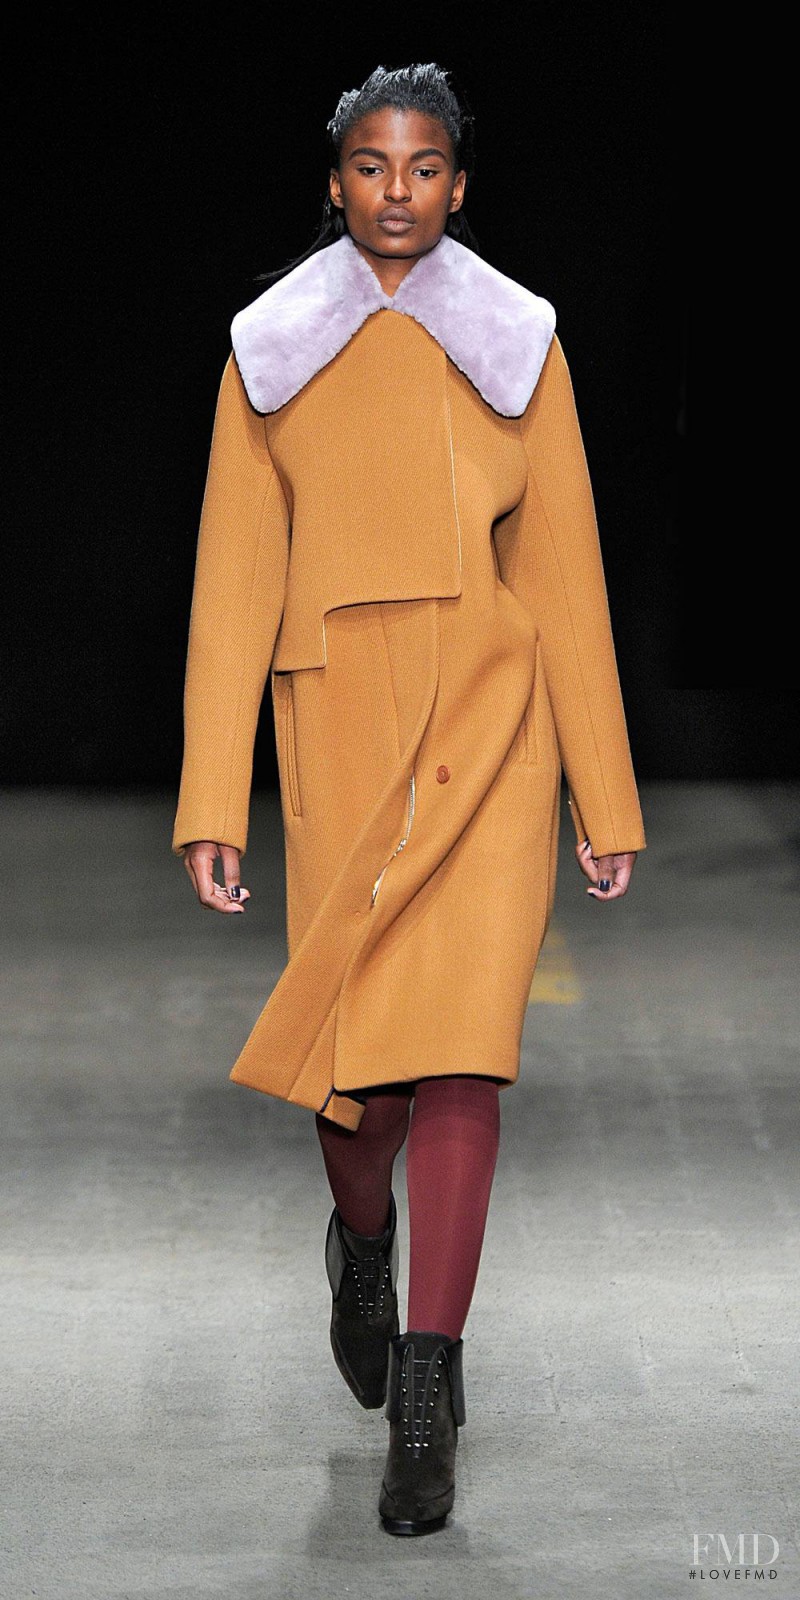 Tsheca White featured in  the 3.1 Phillip Lim fashion show for Autumn/Winter 2014